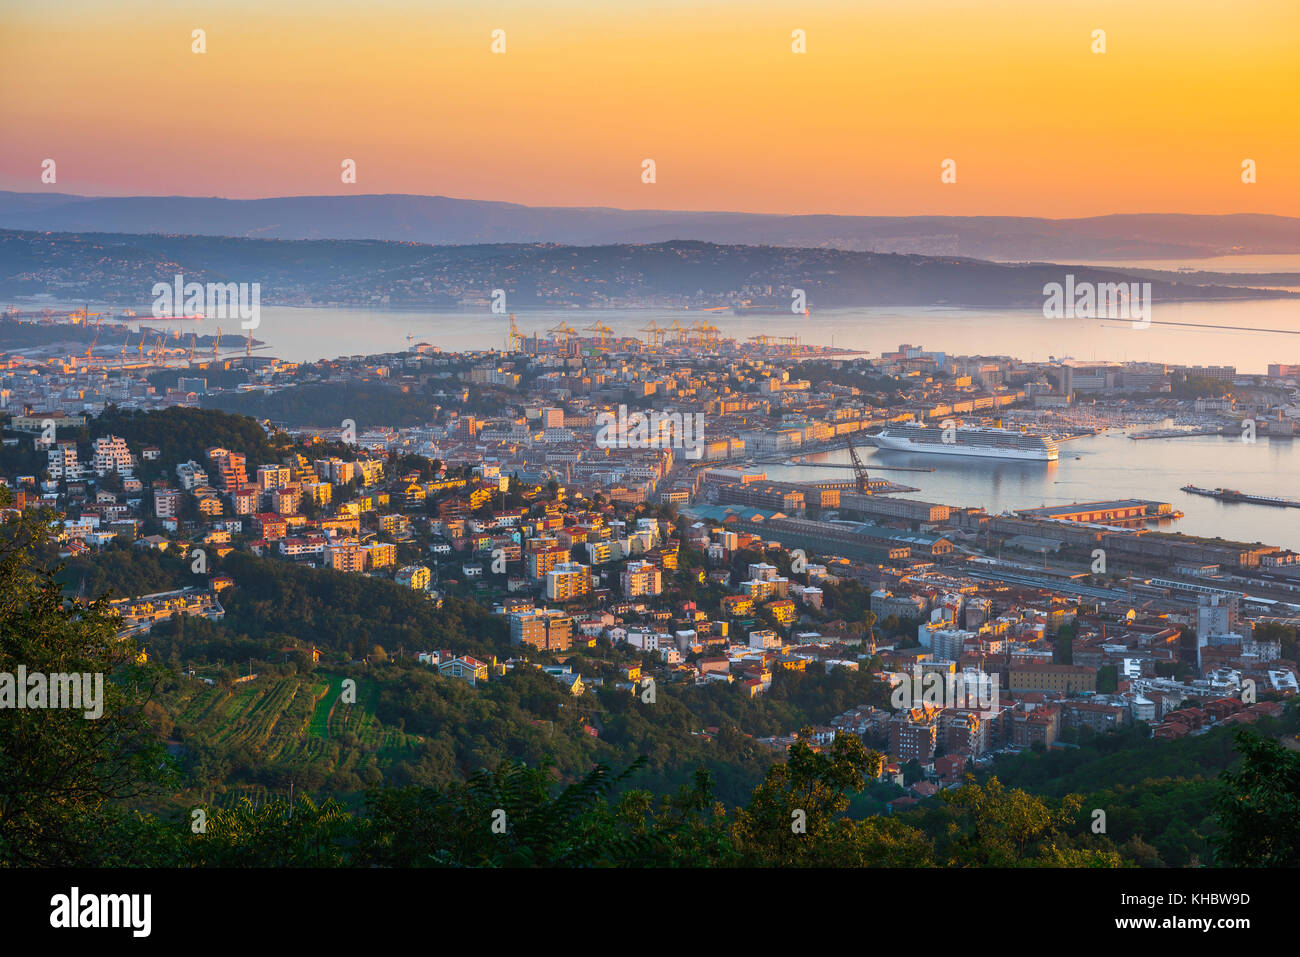 Friuli-Venezia Giulia Italy, aerial view of the port and city of Trieste at sunset, Italy. Stock Photo